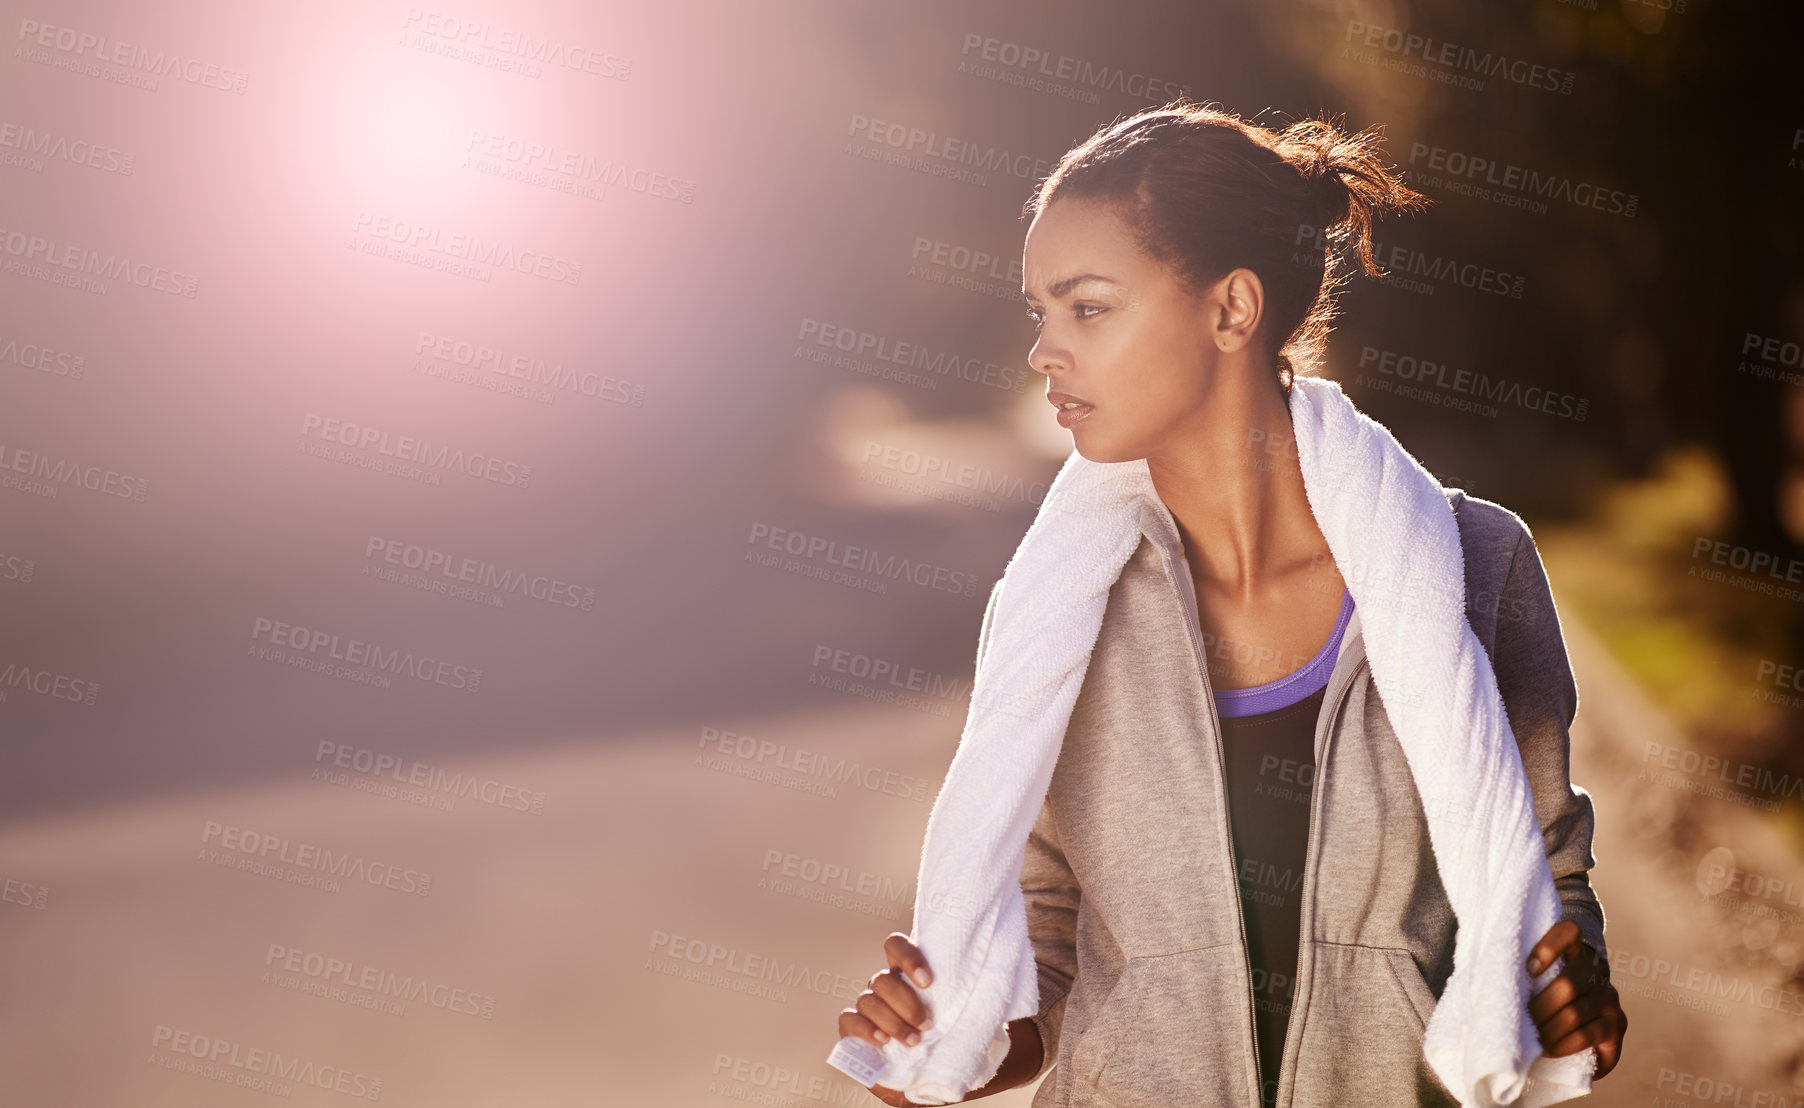 Buy stock photo Shot of a woman holding a towel around her neck after exercising